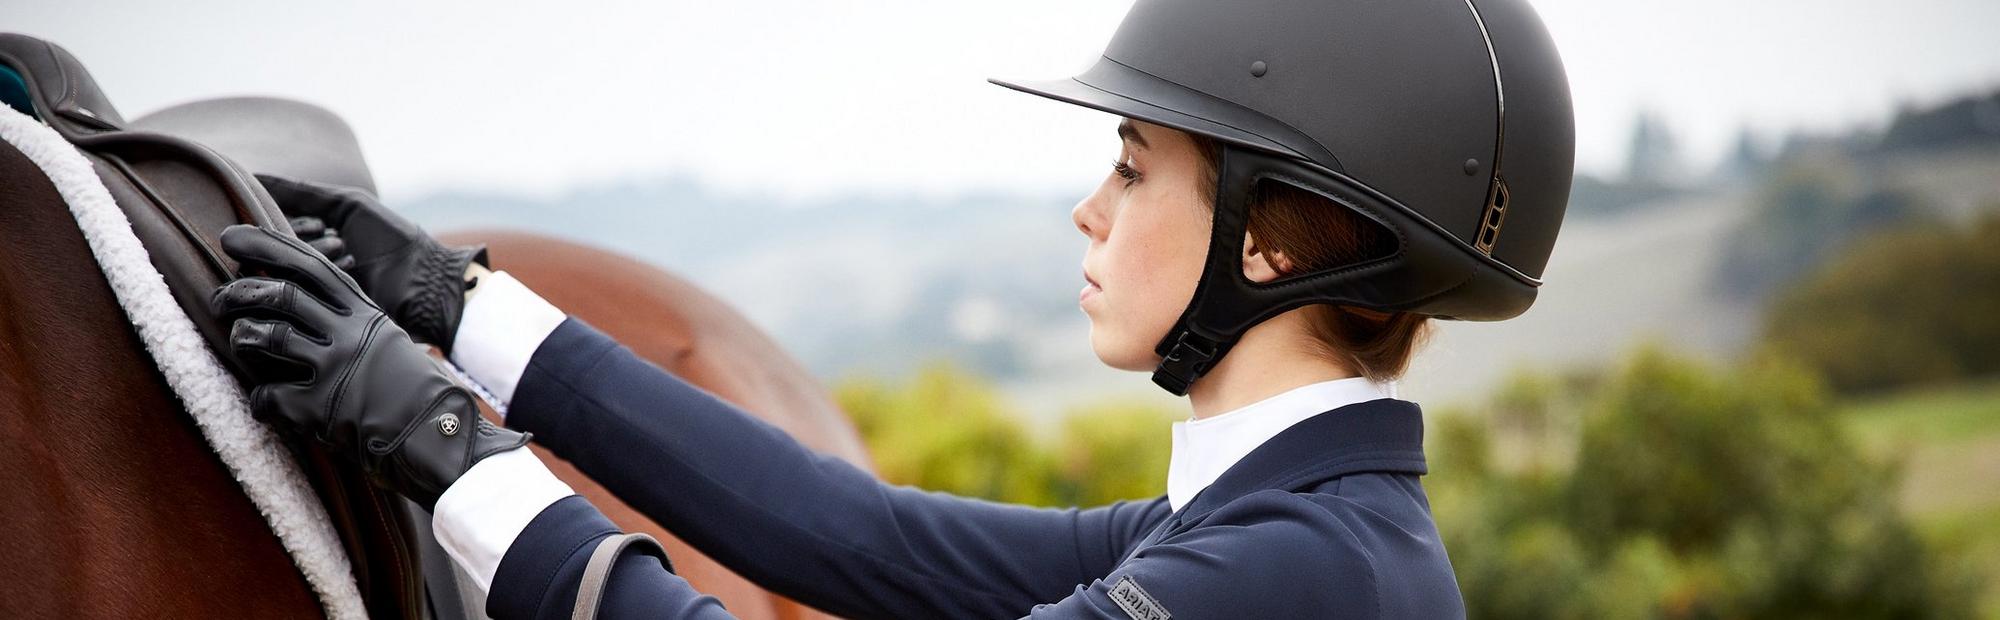 Horseback Riding Lessons for Kids: A Guide to Getting Started